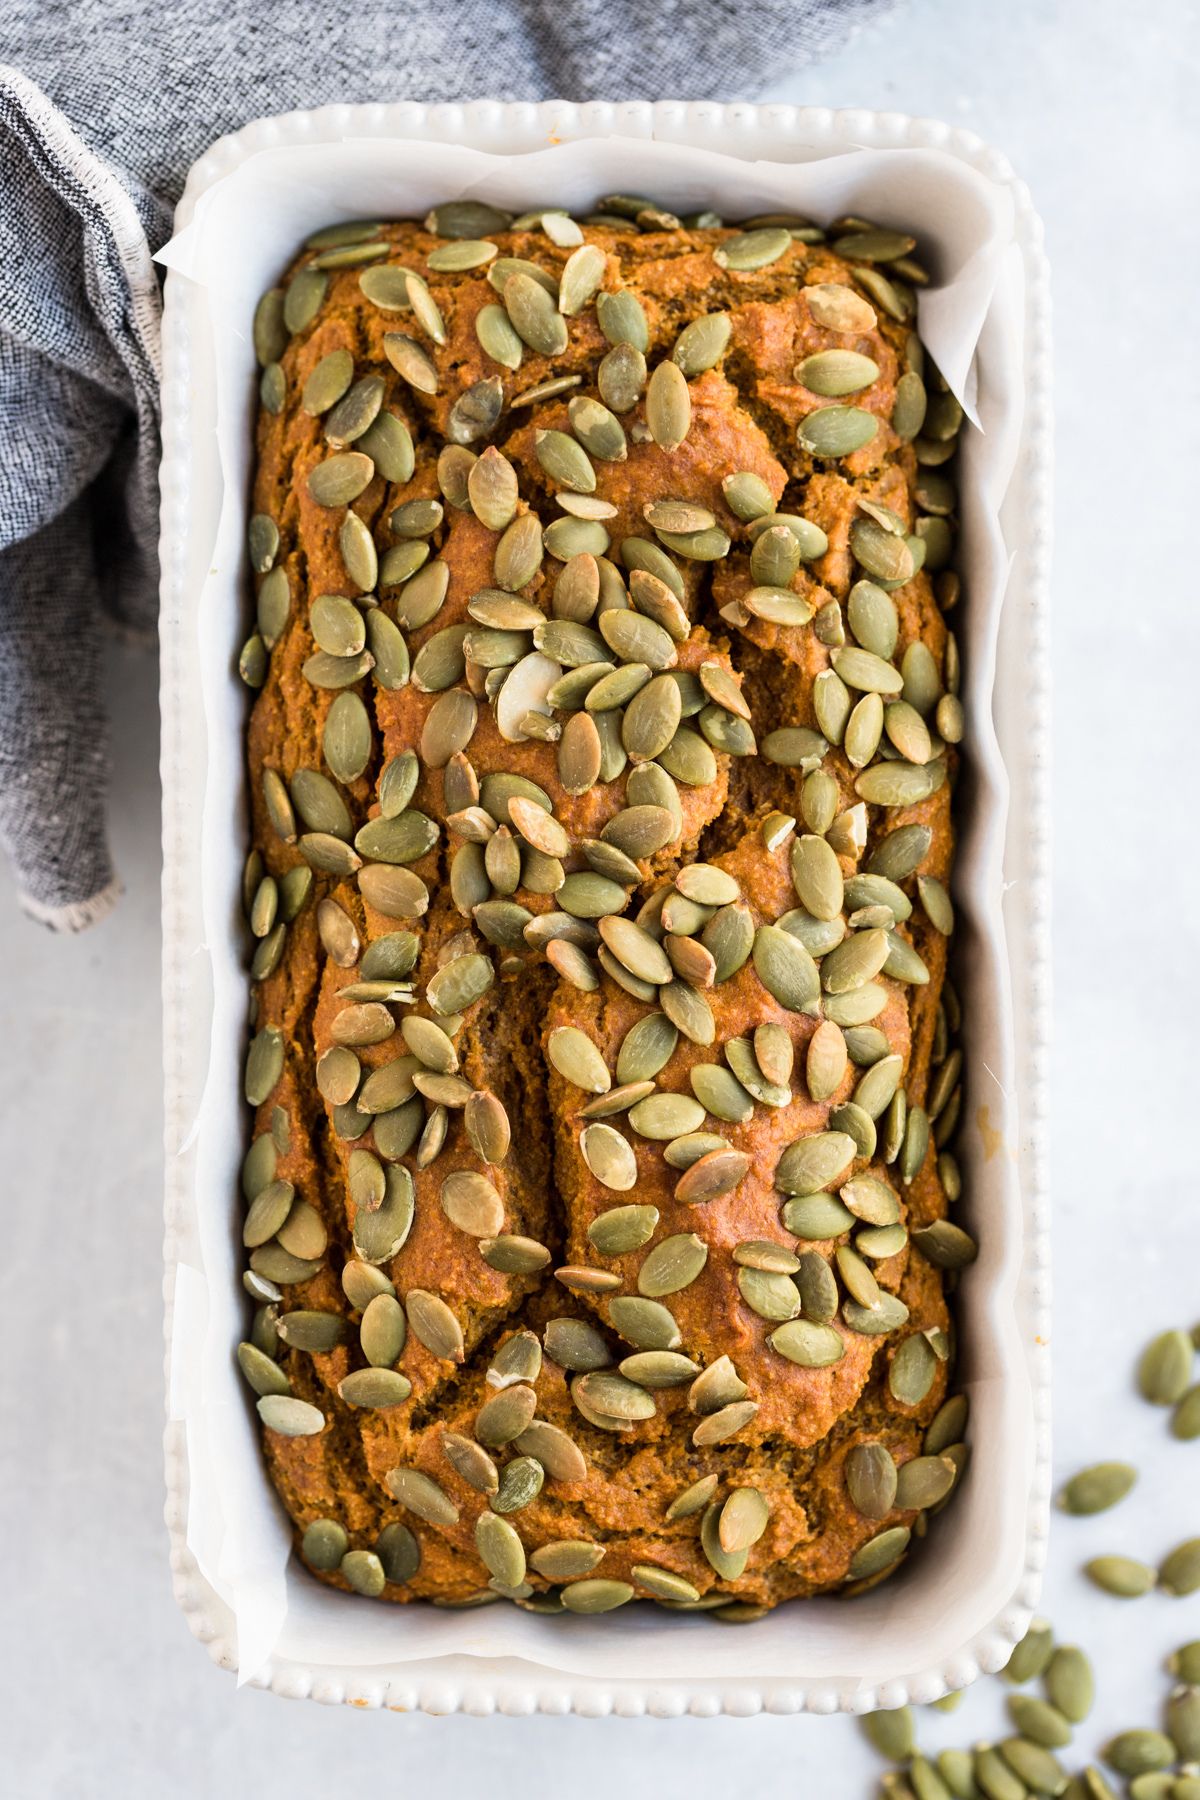 Wholesome & healthy Sugar Free Pumpkin Bread! A moist & flavorful bread that's thick & hearty. Perfect for breakfast, sandwiches, or an anytime snack. Gluten Free + Low Calorie + Paleo